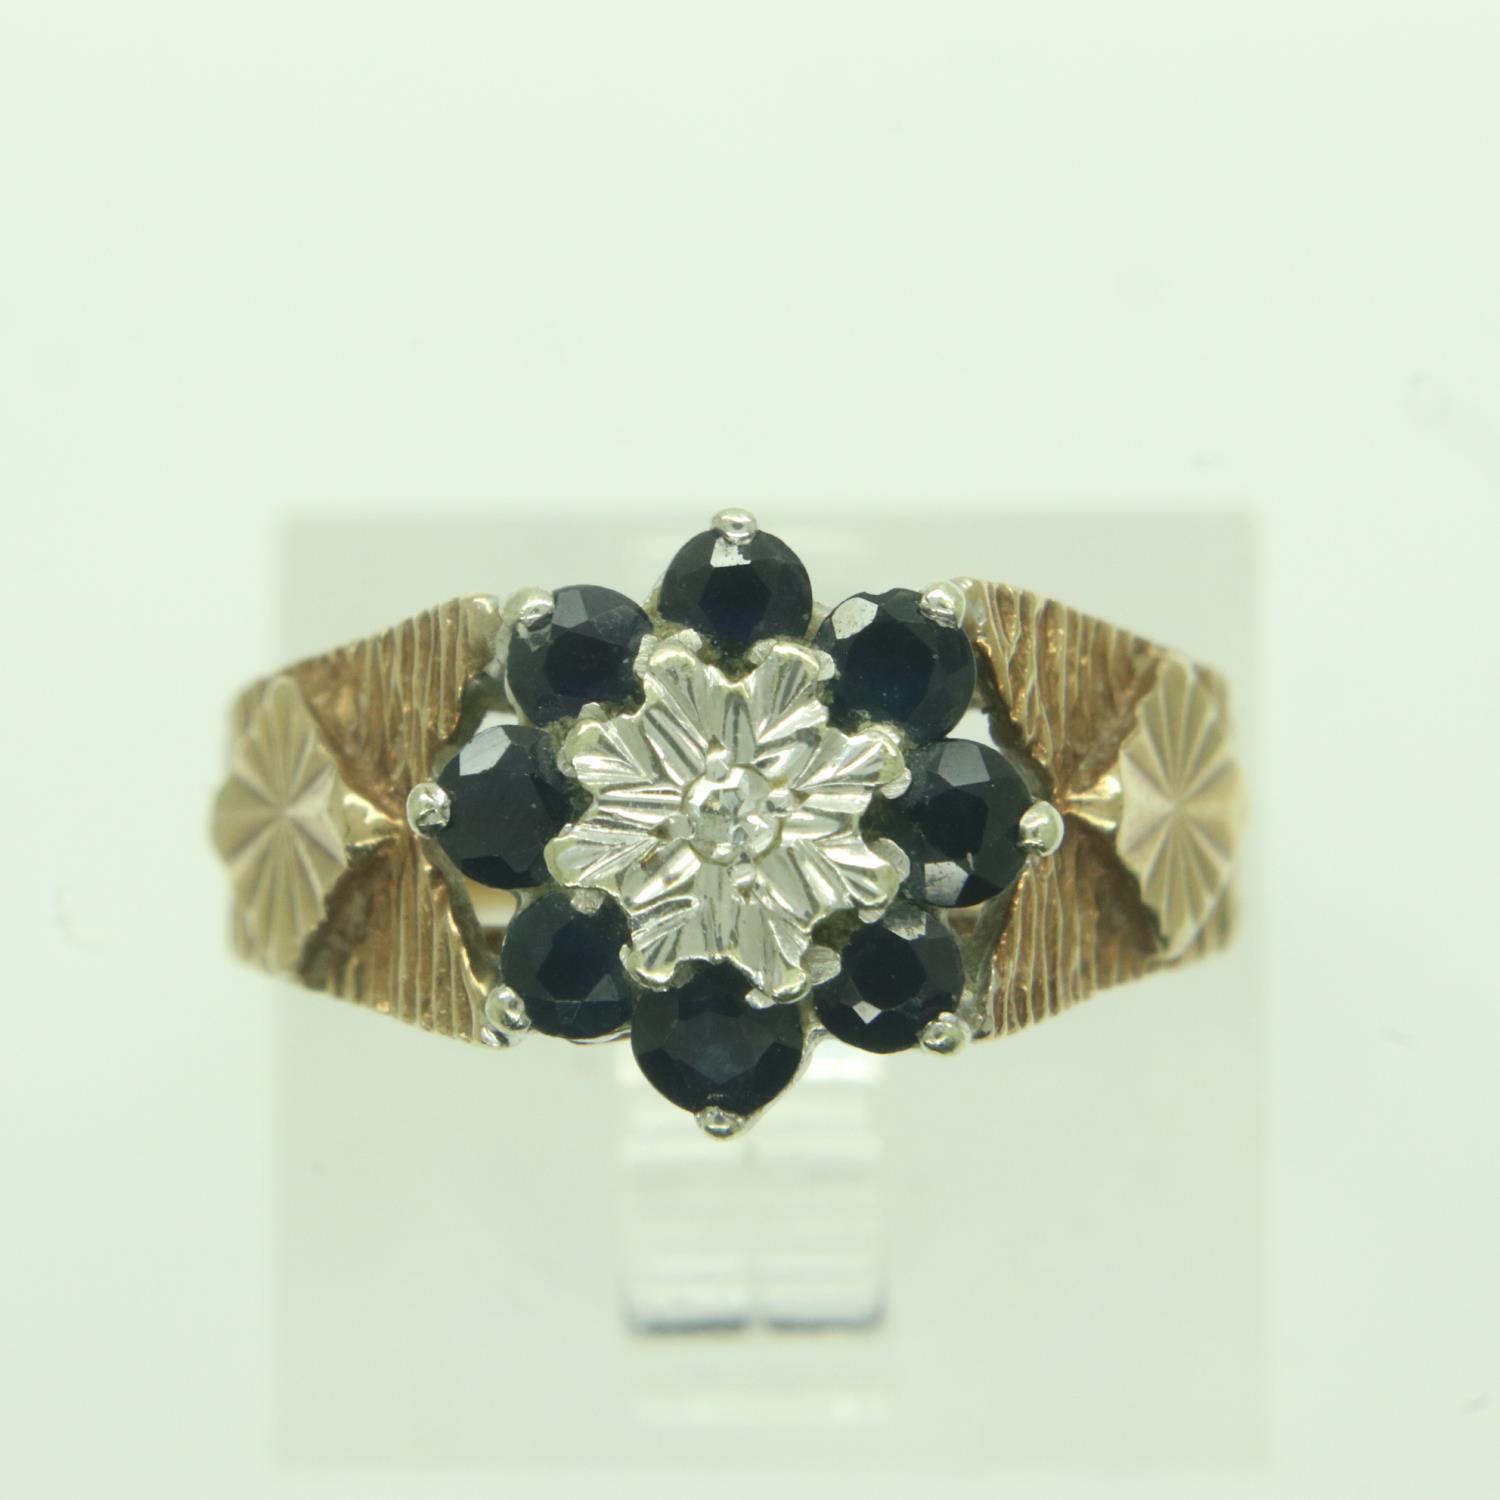 9ct gold ring set with diamonds and sapphires, size J, 3.6g. UK P&P Group 0 (£6+VAT for the first